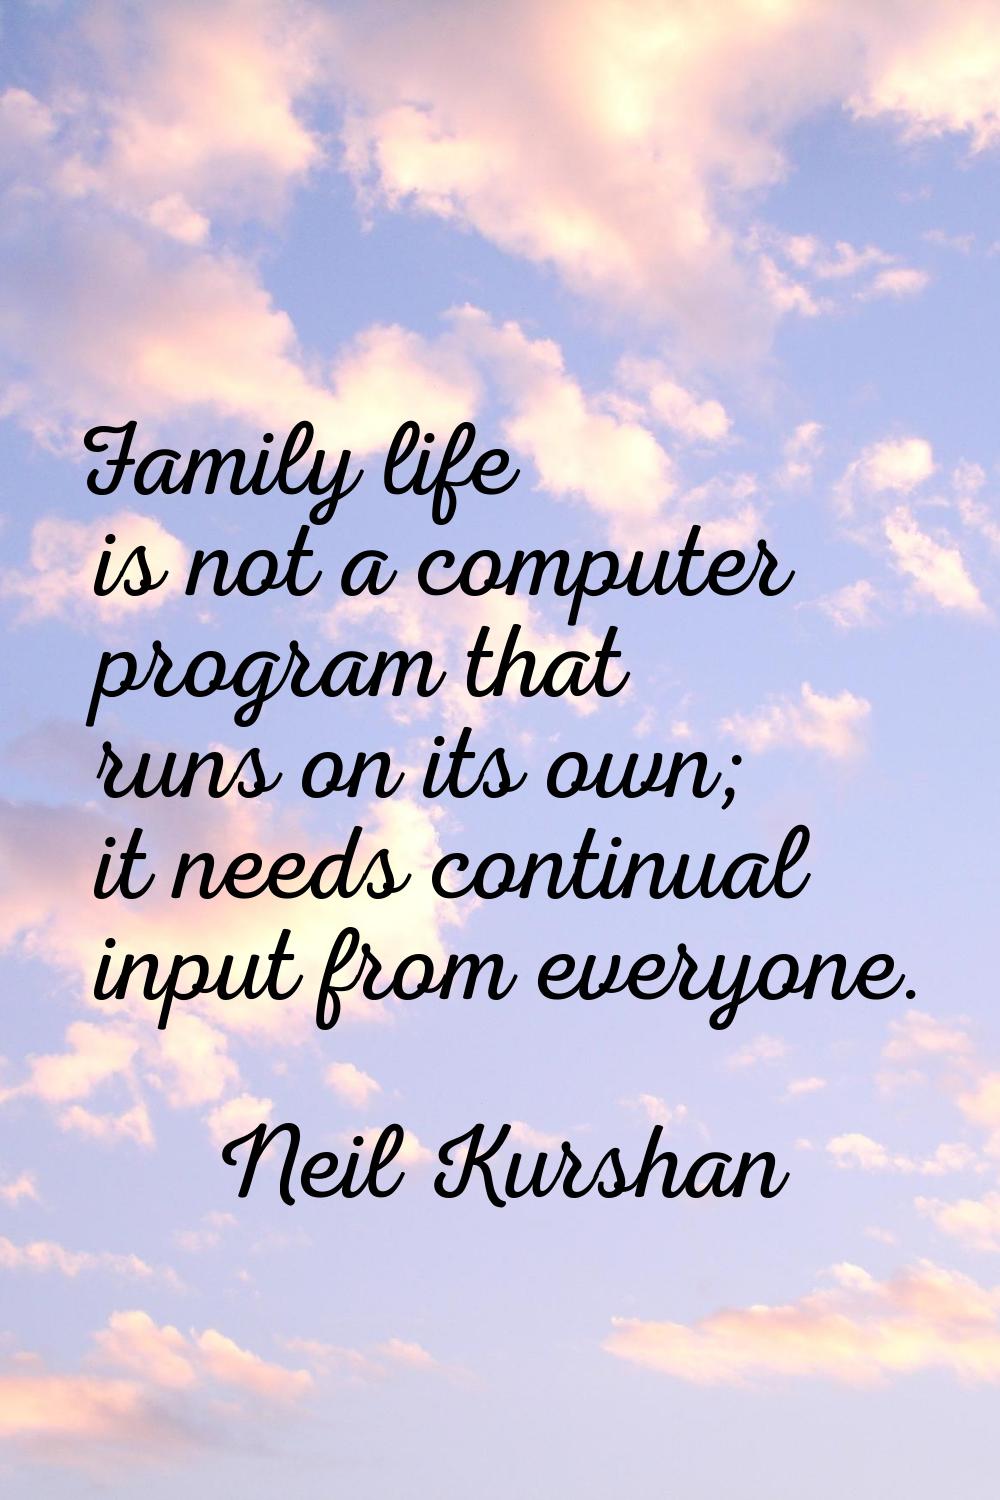 Family life is not a computer program that runs on its own; it needs continual input from everyone.